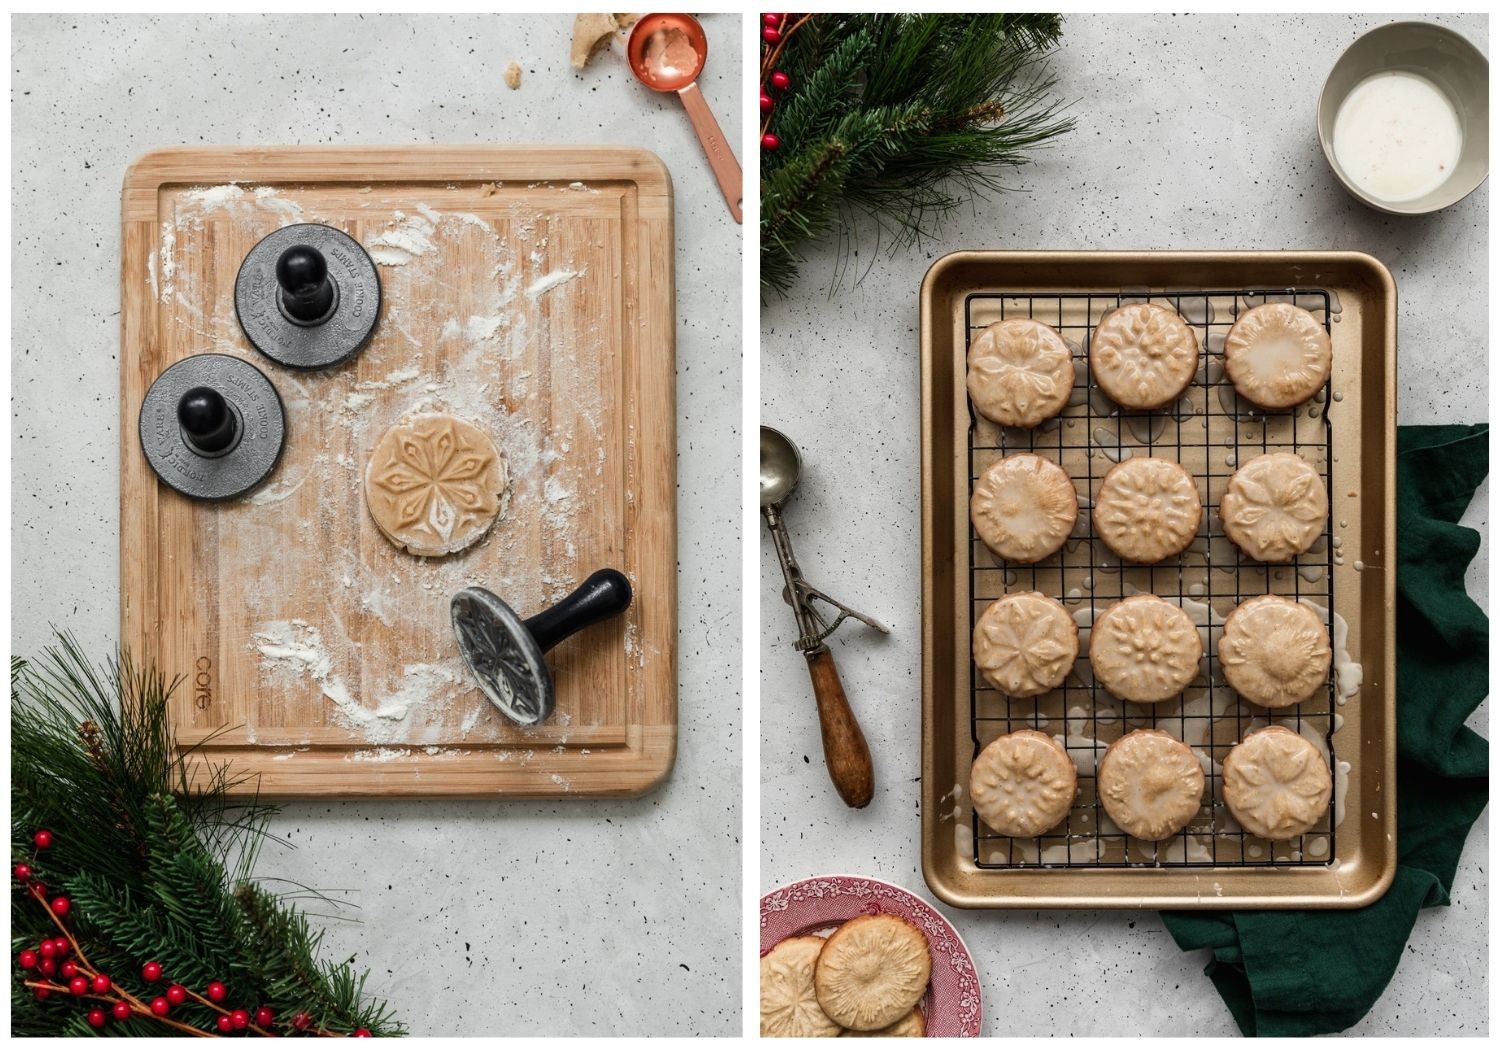 Two images; on the left, a stamped cookie is placed on a wood board surrounded by cookie stamps. On the right, baked and glazed cookies are set on a cooling rack.